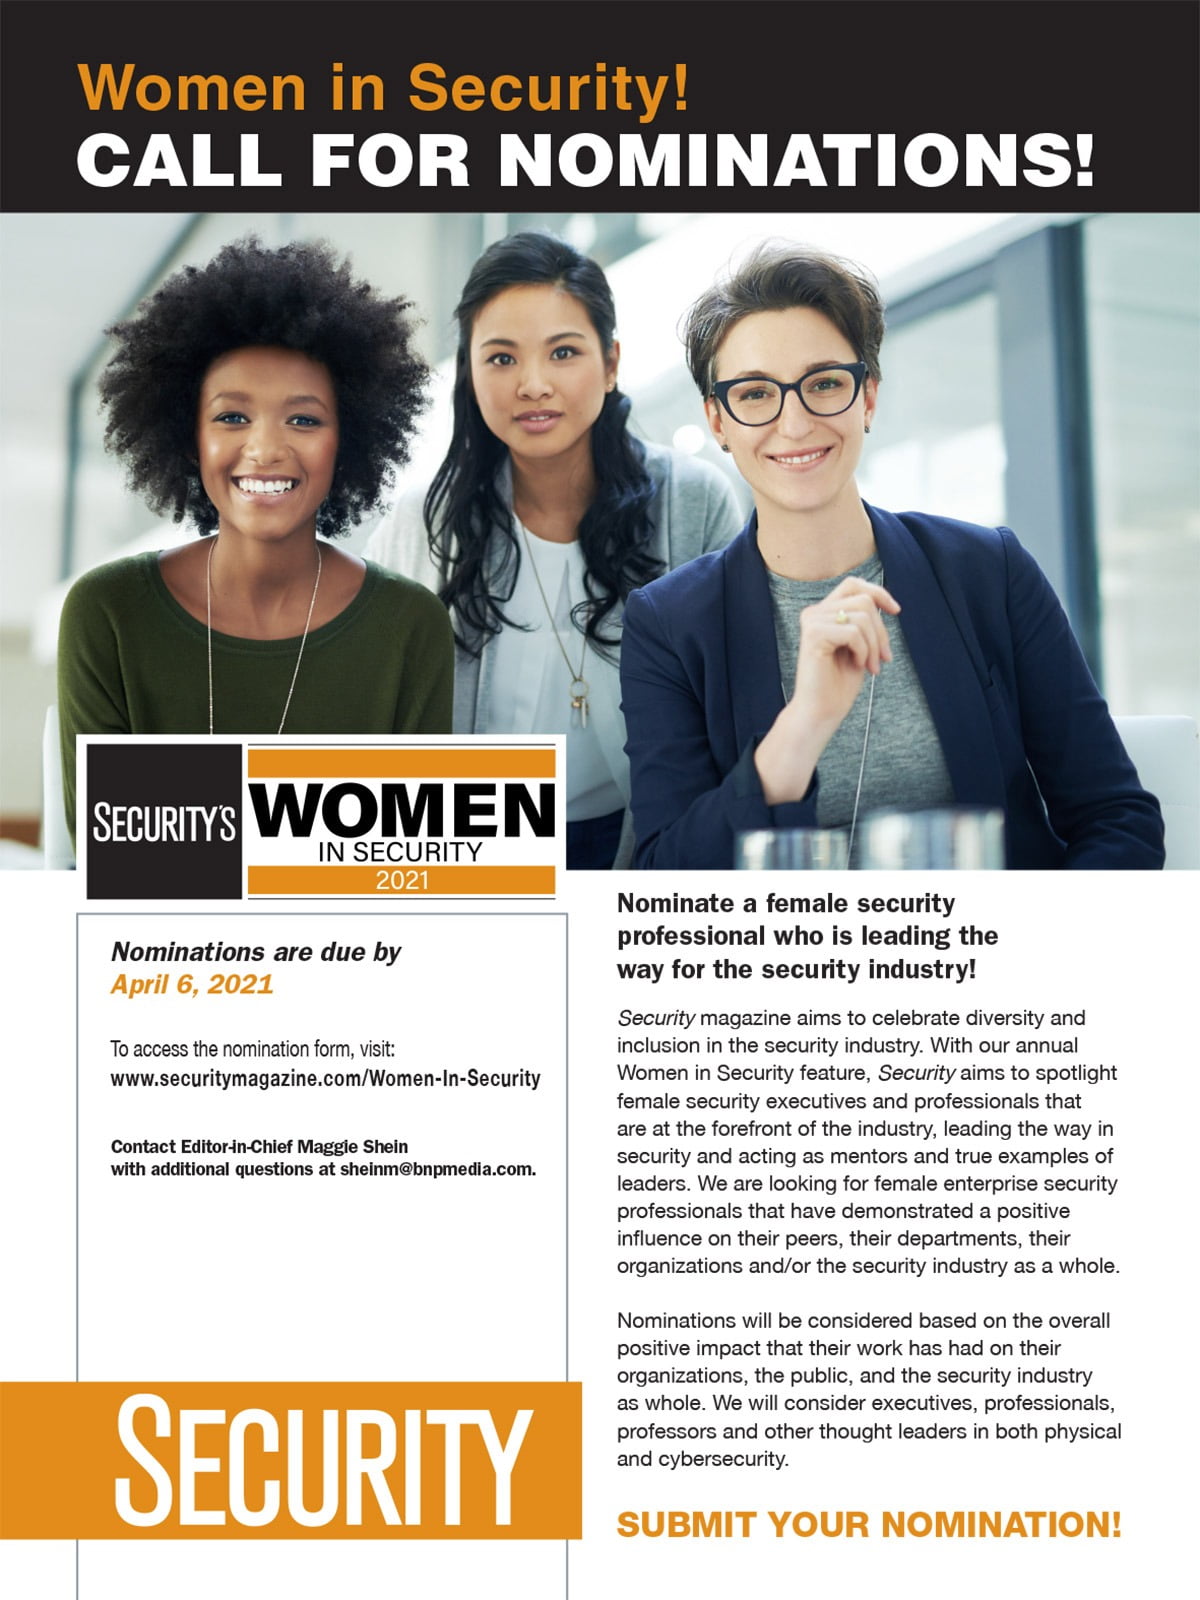 Women in Security AD